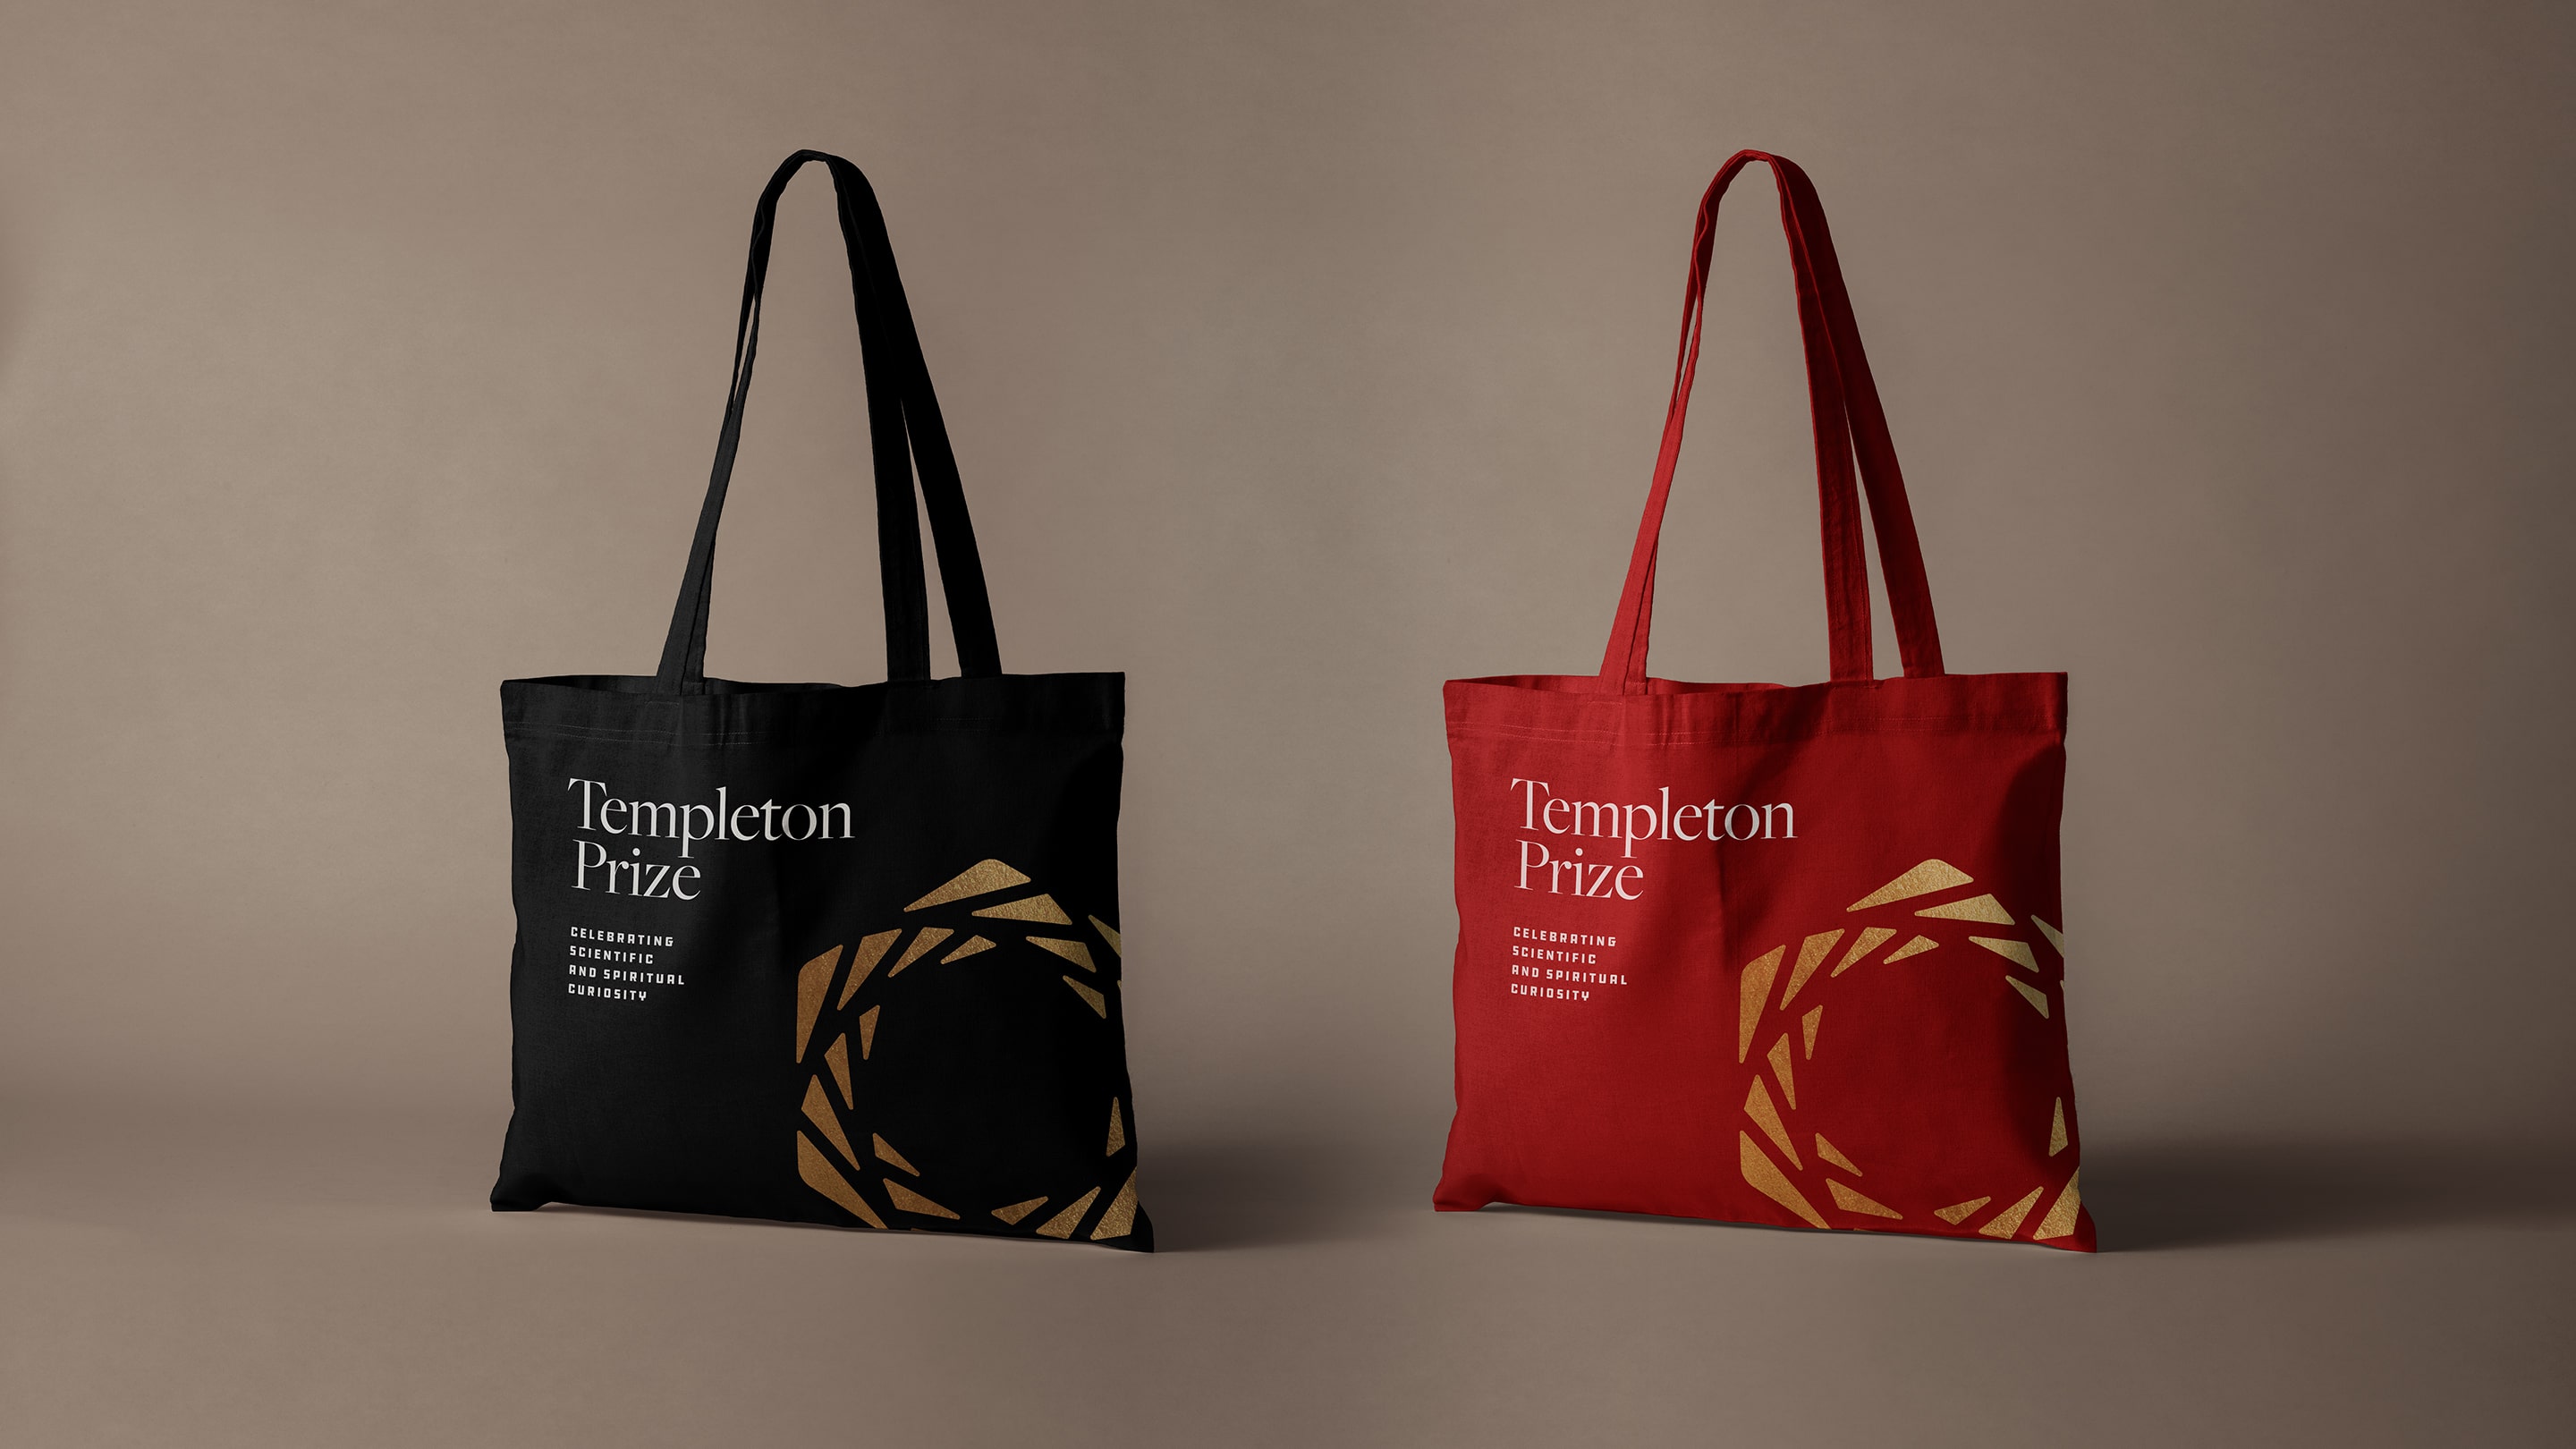 Brand identity design for Templeton Prize, an award honoring progress in science and spirituality